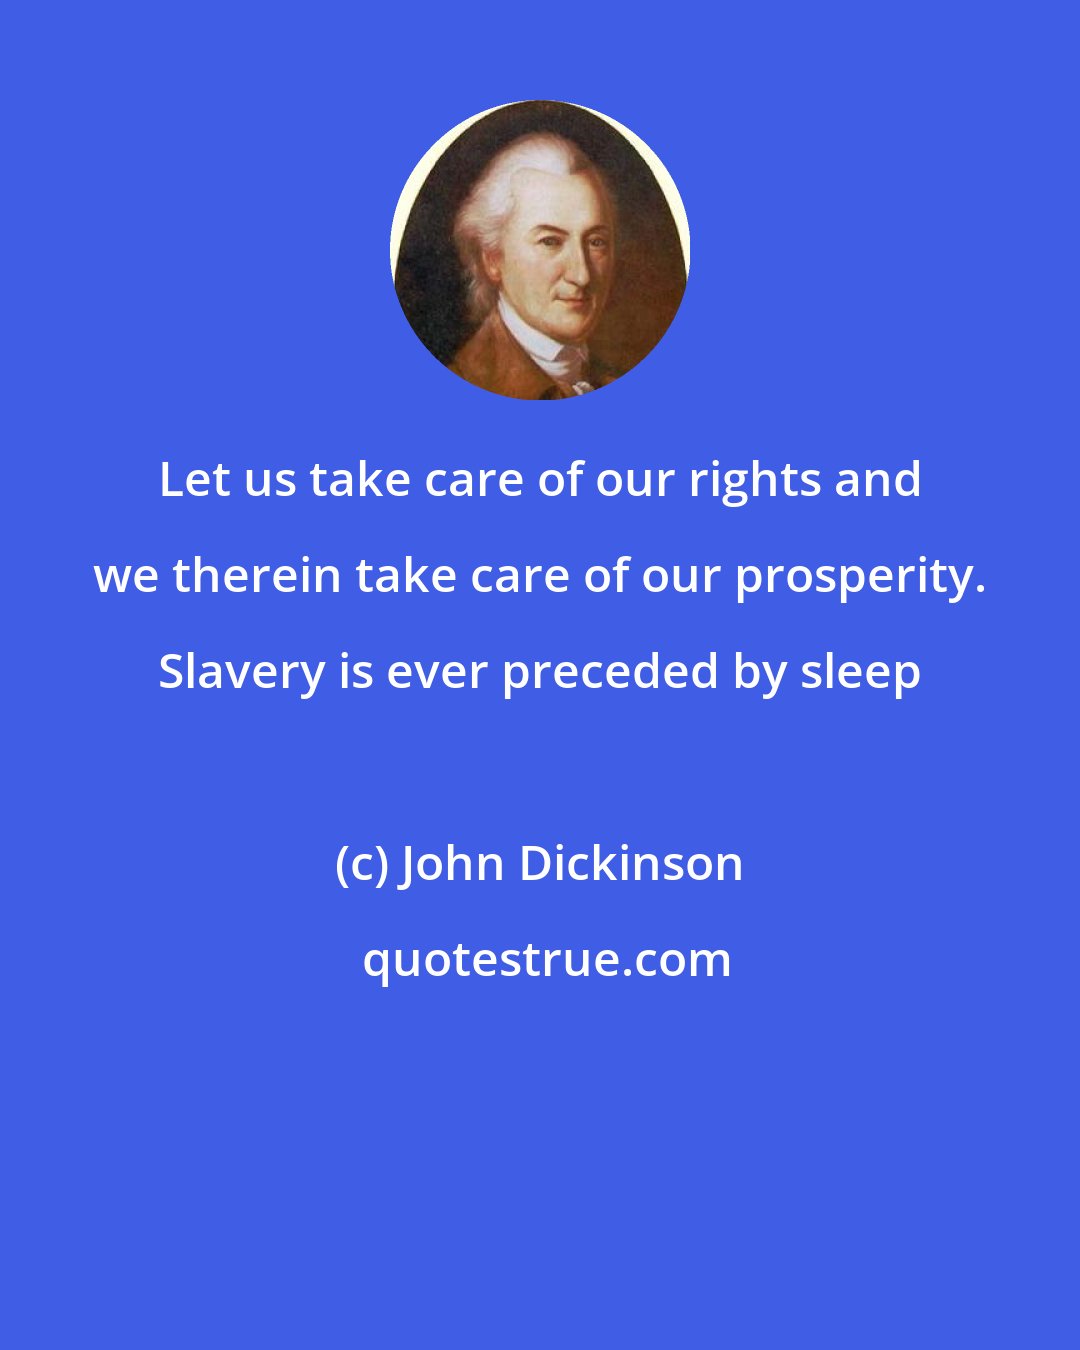 John Dickinson: Let us take care of our rights and we therein take care of our prosperity. Slavery is ever preceded by sleep